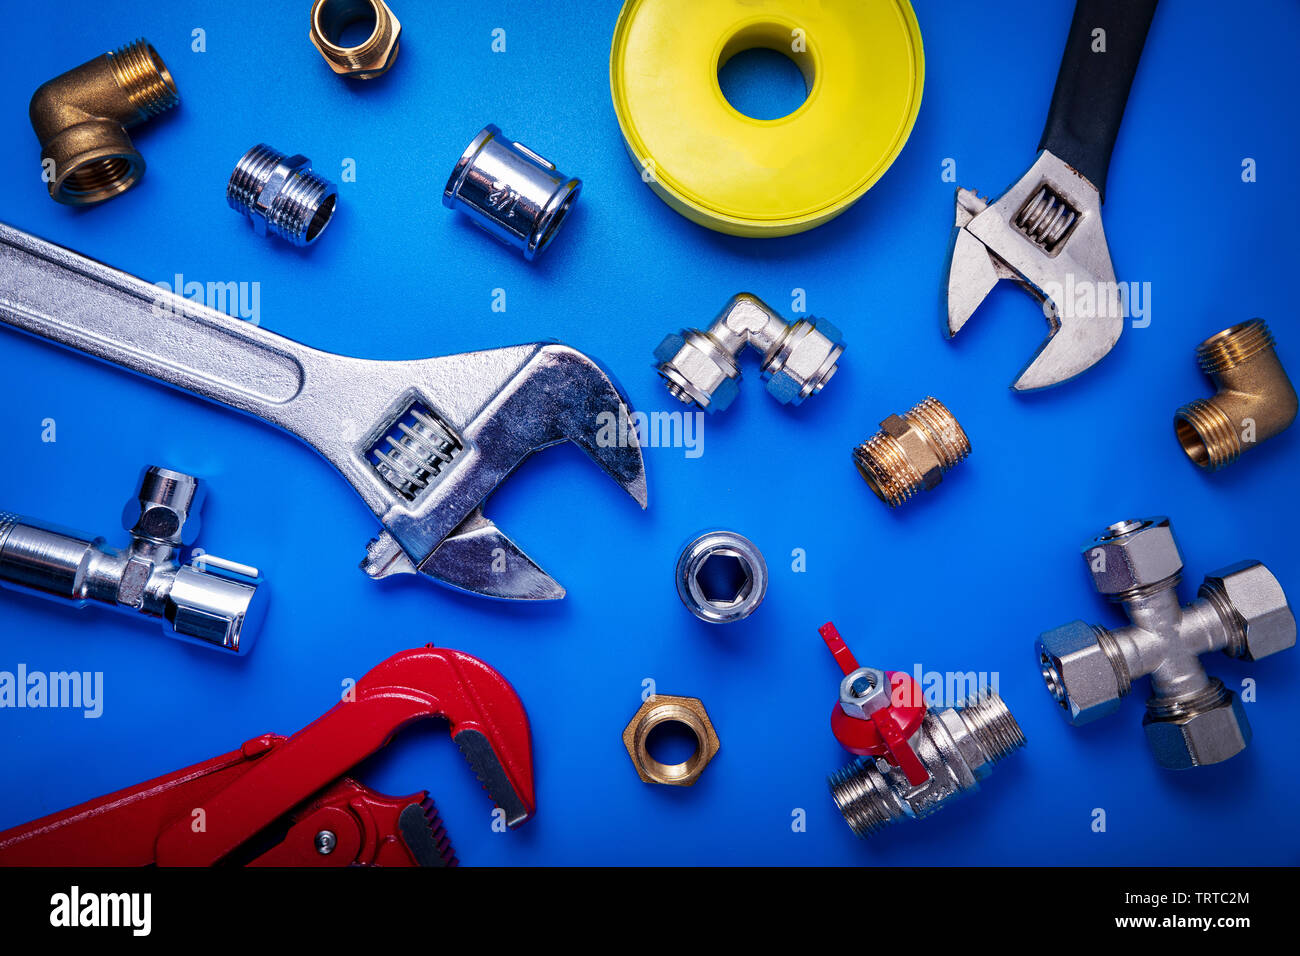 plumber equipment on blue background top view Stock Photo